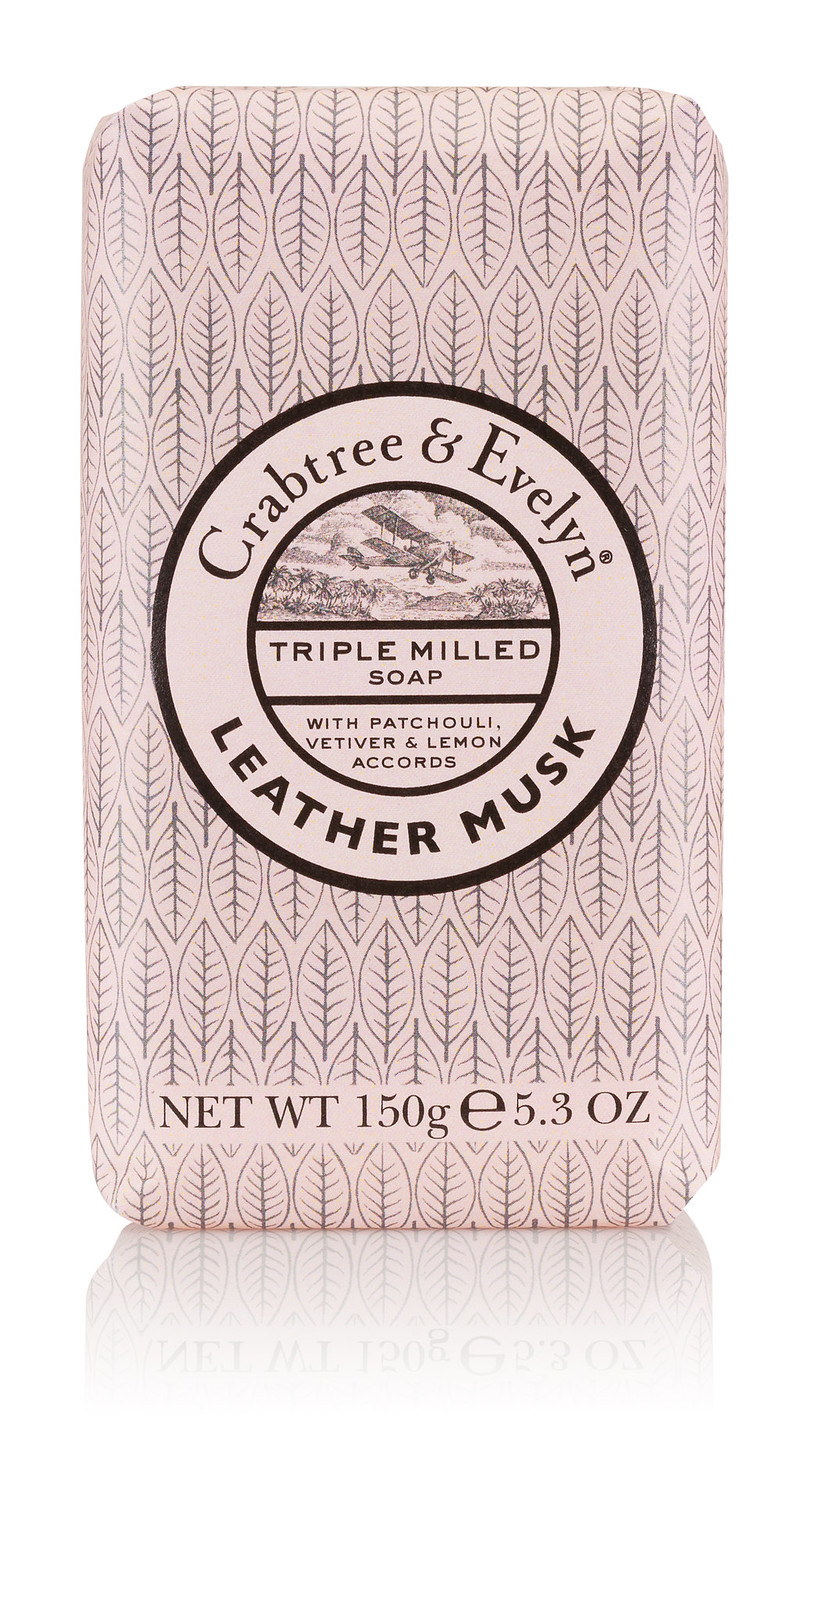 Crabtree & Evelyn Unveils Leather Musk, an Exotic Oriental Fragrance - Alvinology